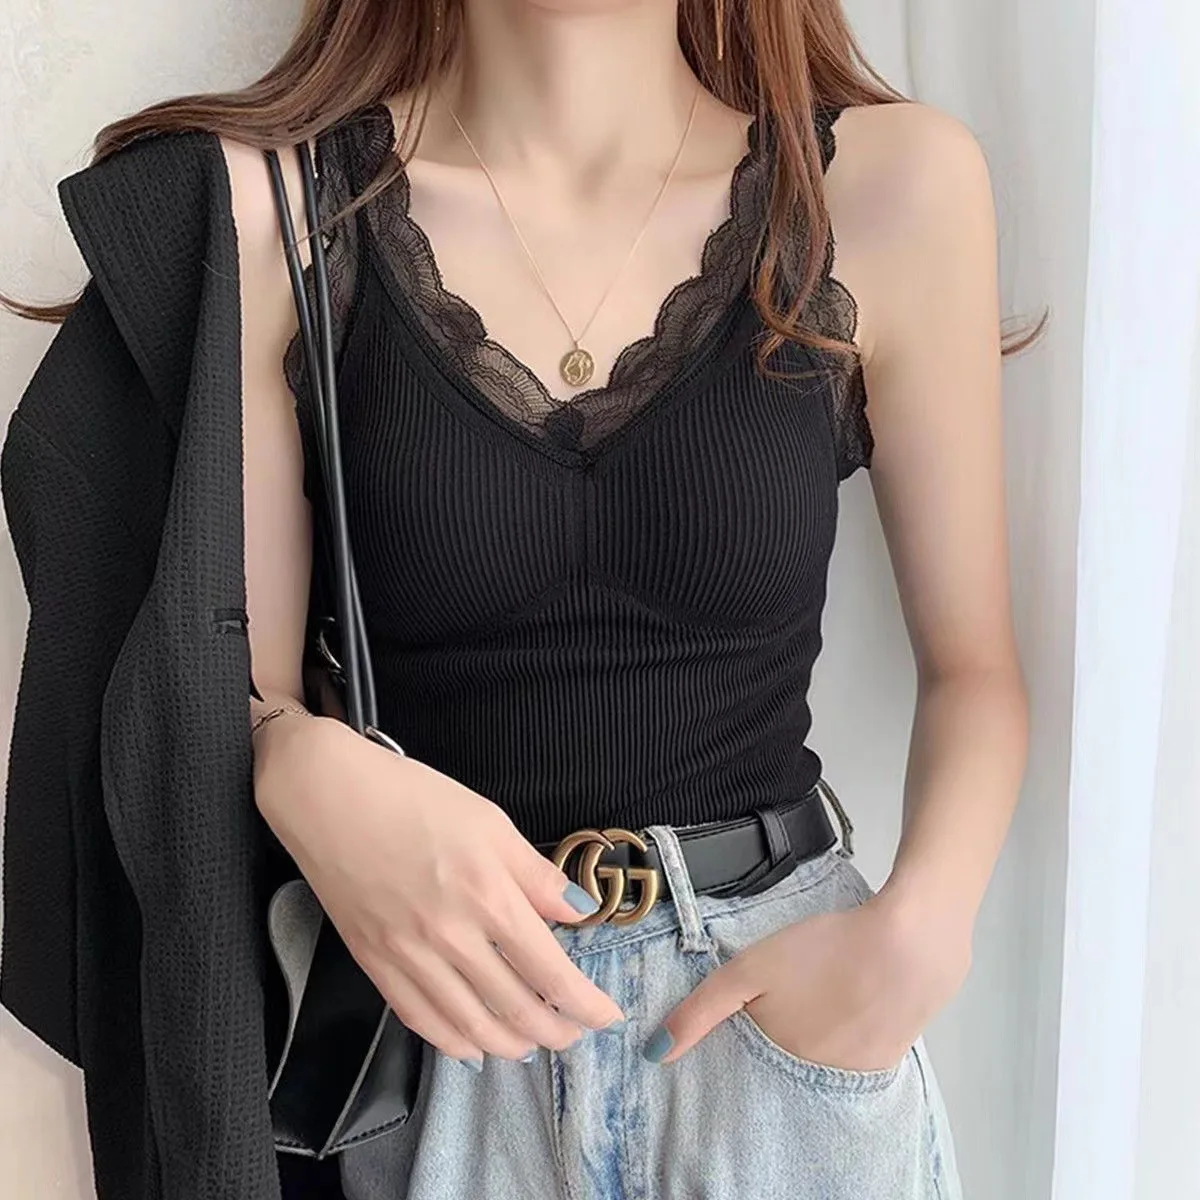 

Thermal Underwear Intimate Vest Korean Style Woman Winter Clothing Warm Top Inner Wear Thermo Shirt Undershirt Intimate Lace